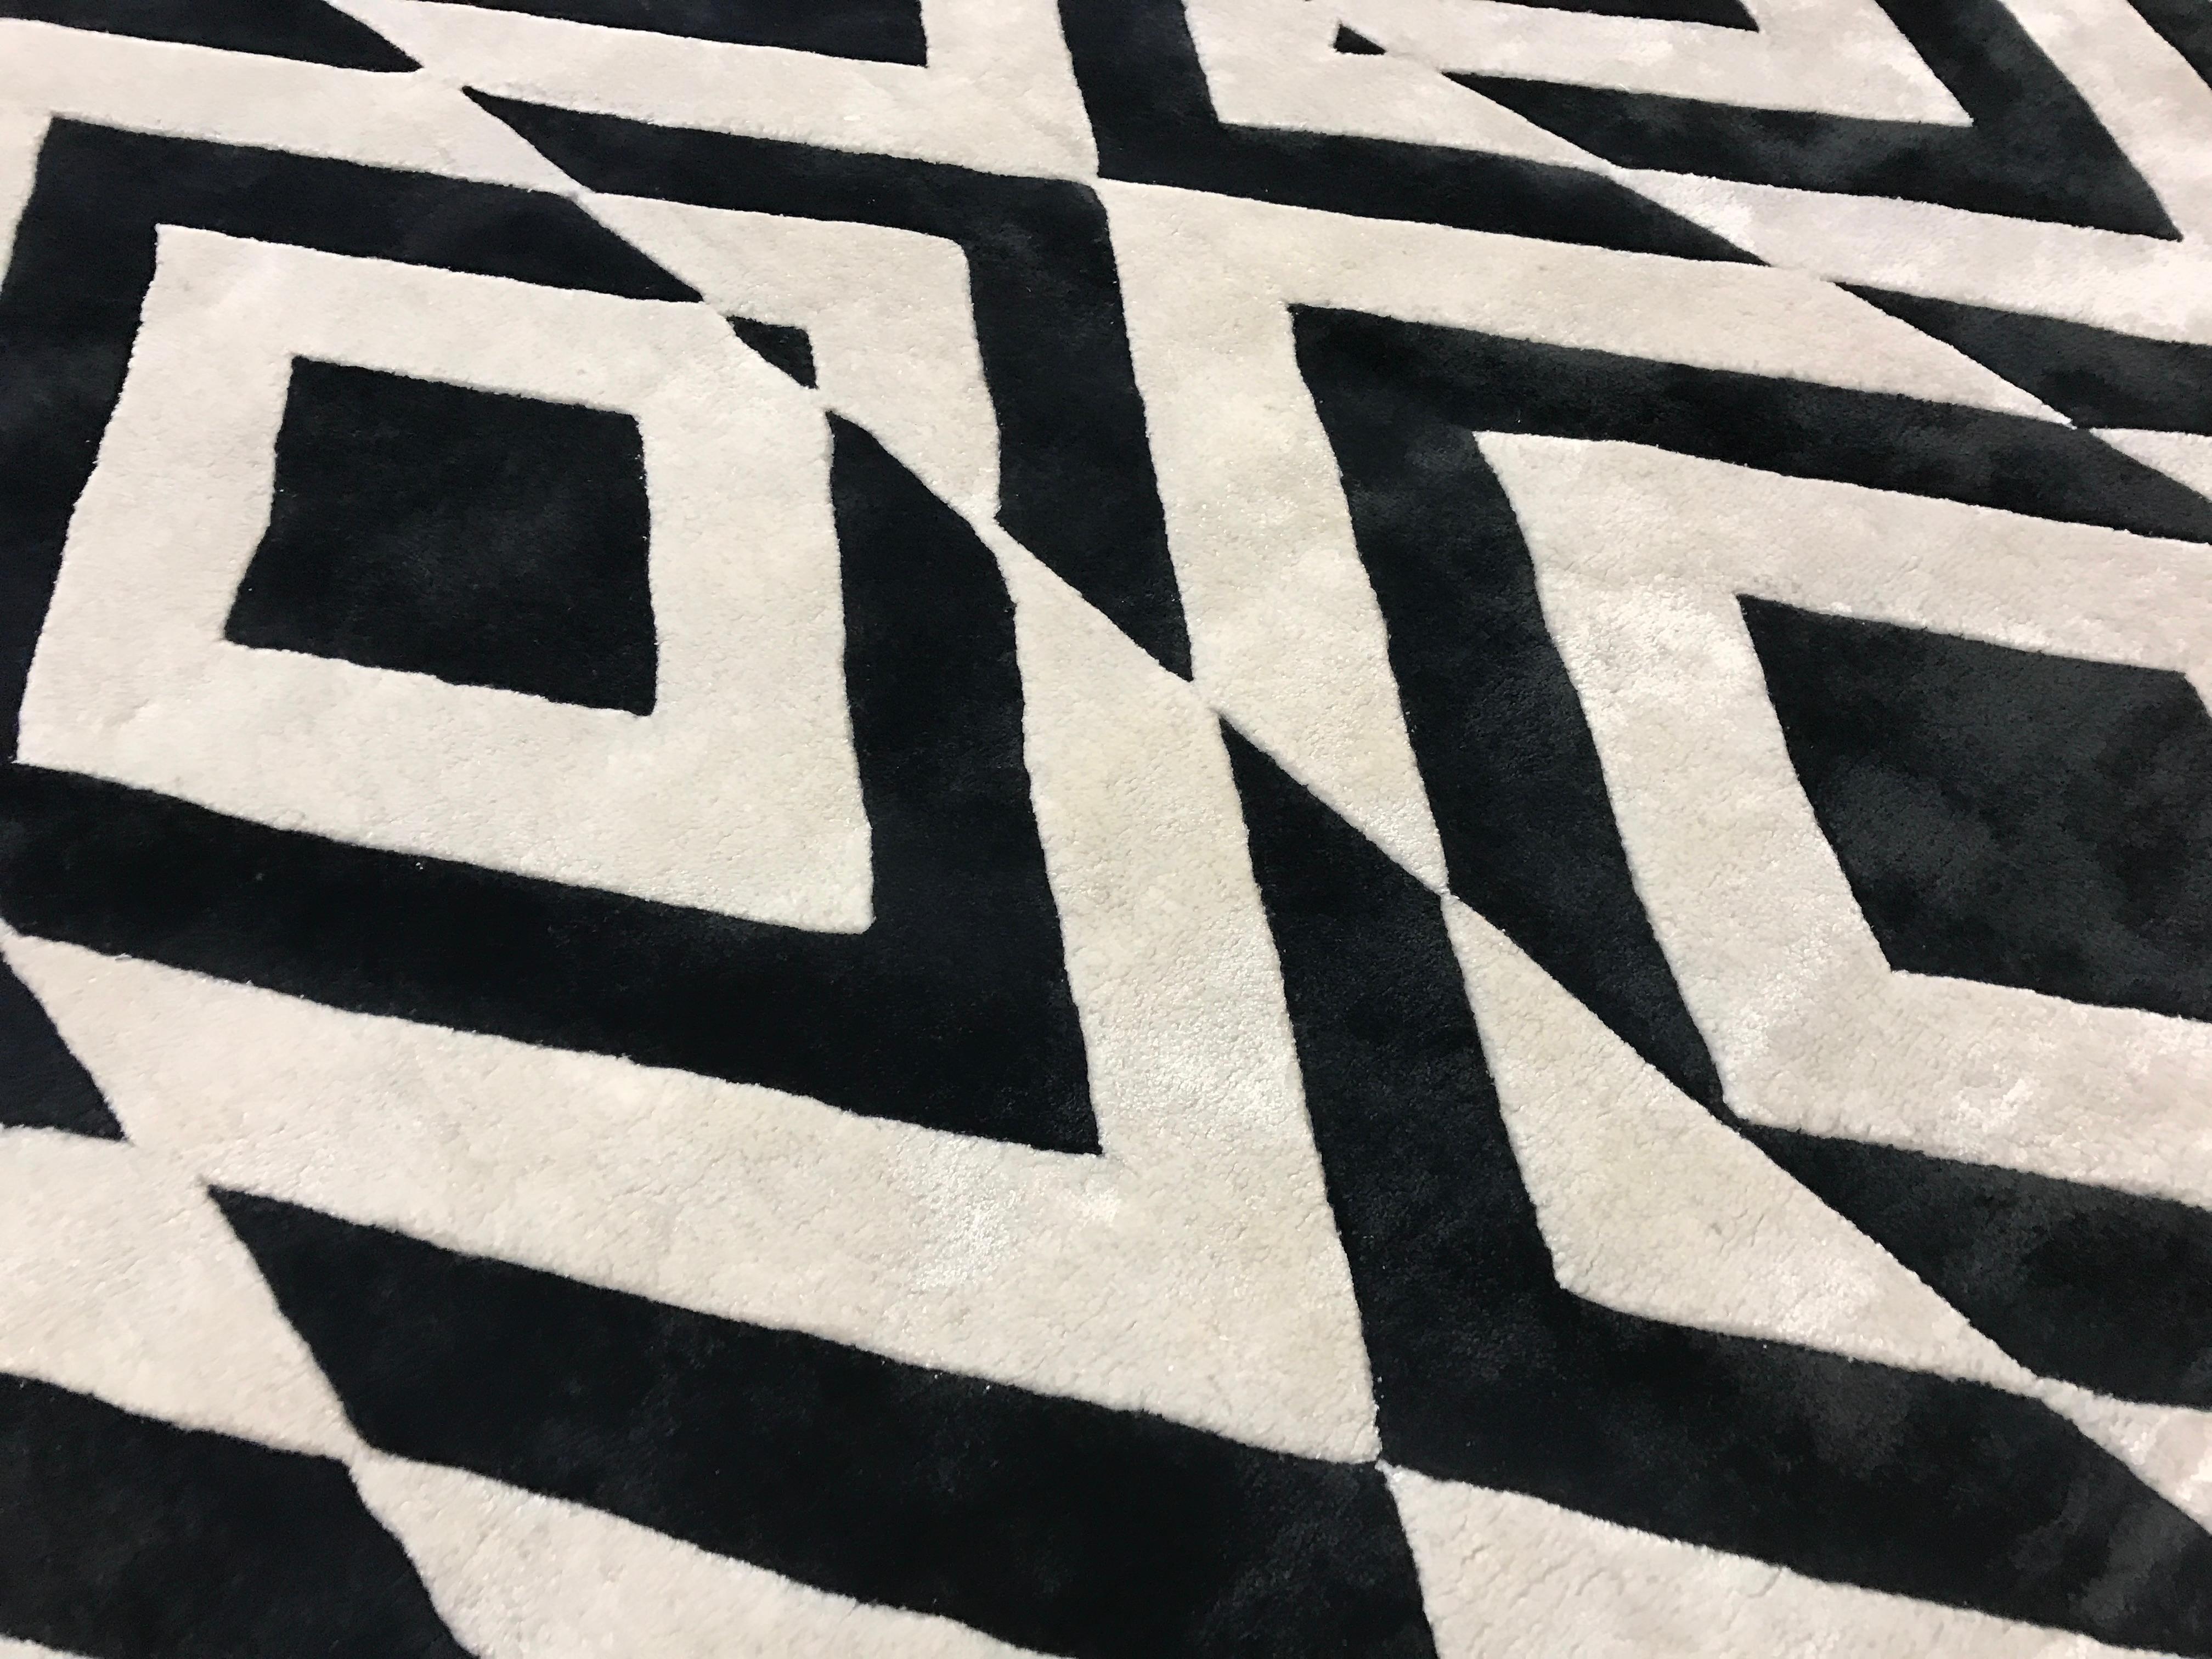 The black silk of the decoration creates a stunning pattern of diamonds divided into off-placed strips.
This rug is hand knotted in Nepal by our artisans by using 50% silk and 50% fine Himalayan wool dyed using vegetable and mineral pigments. The